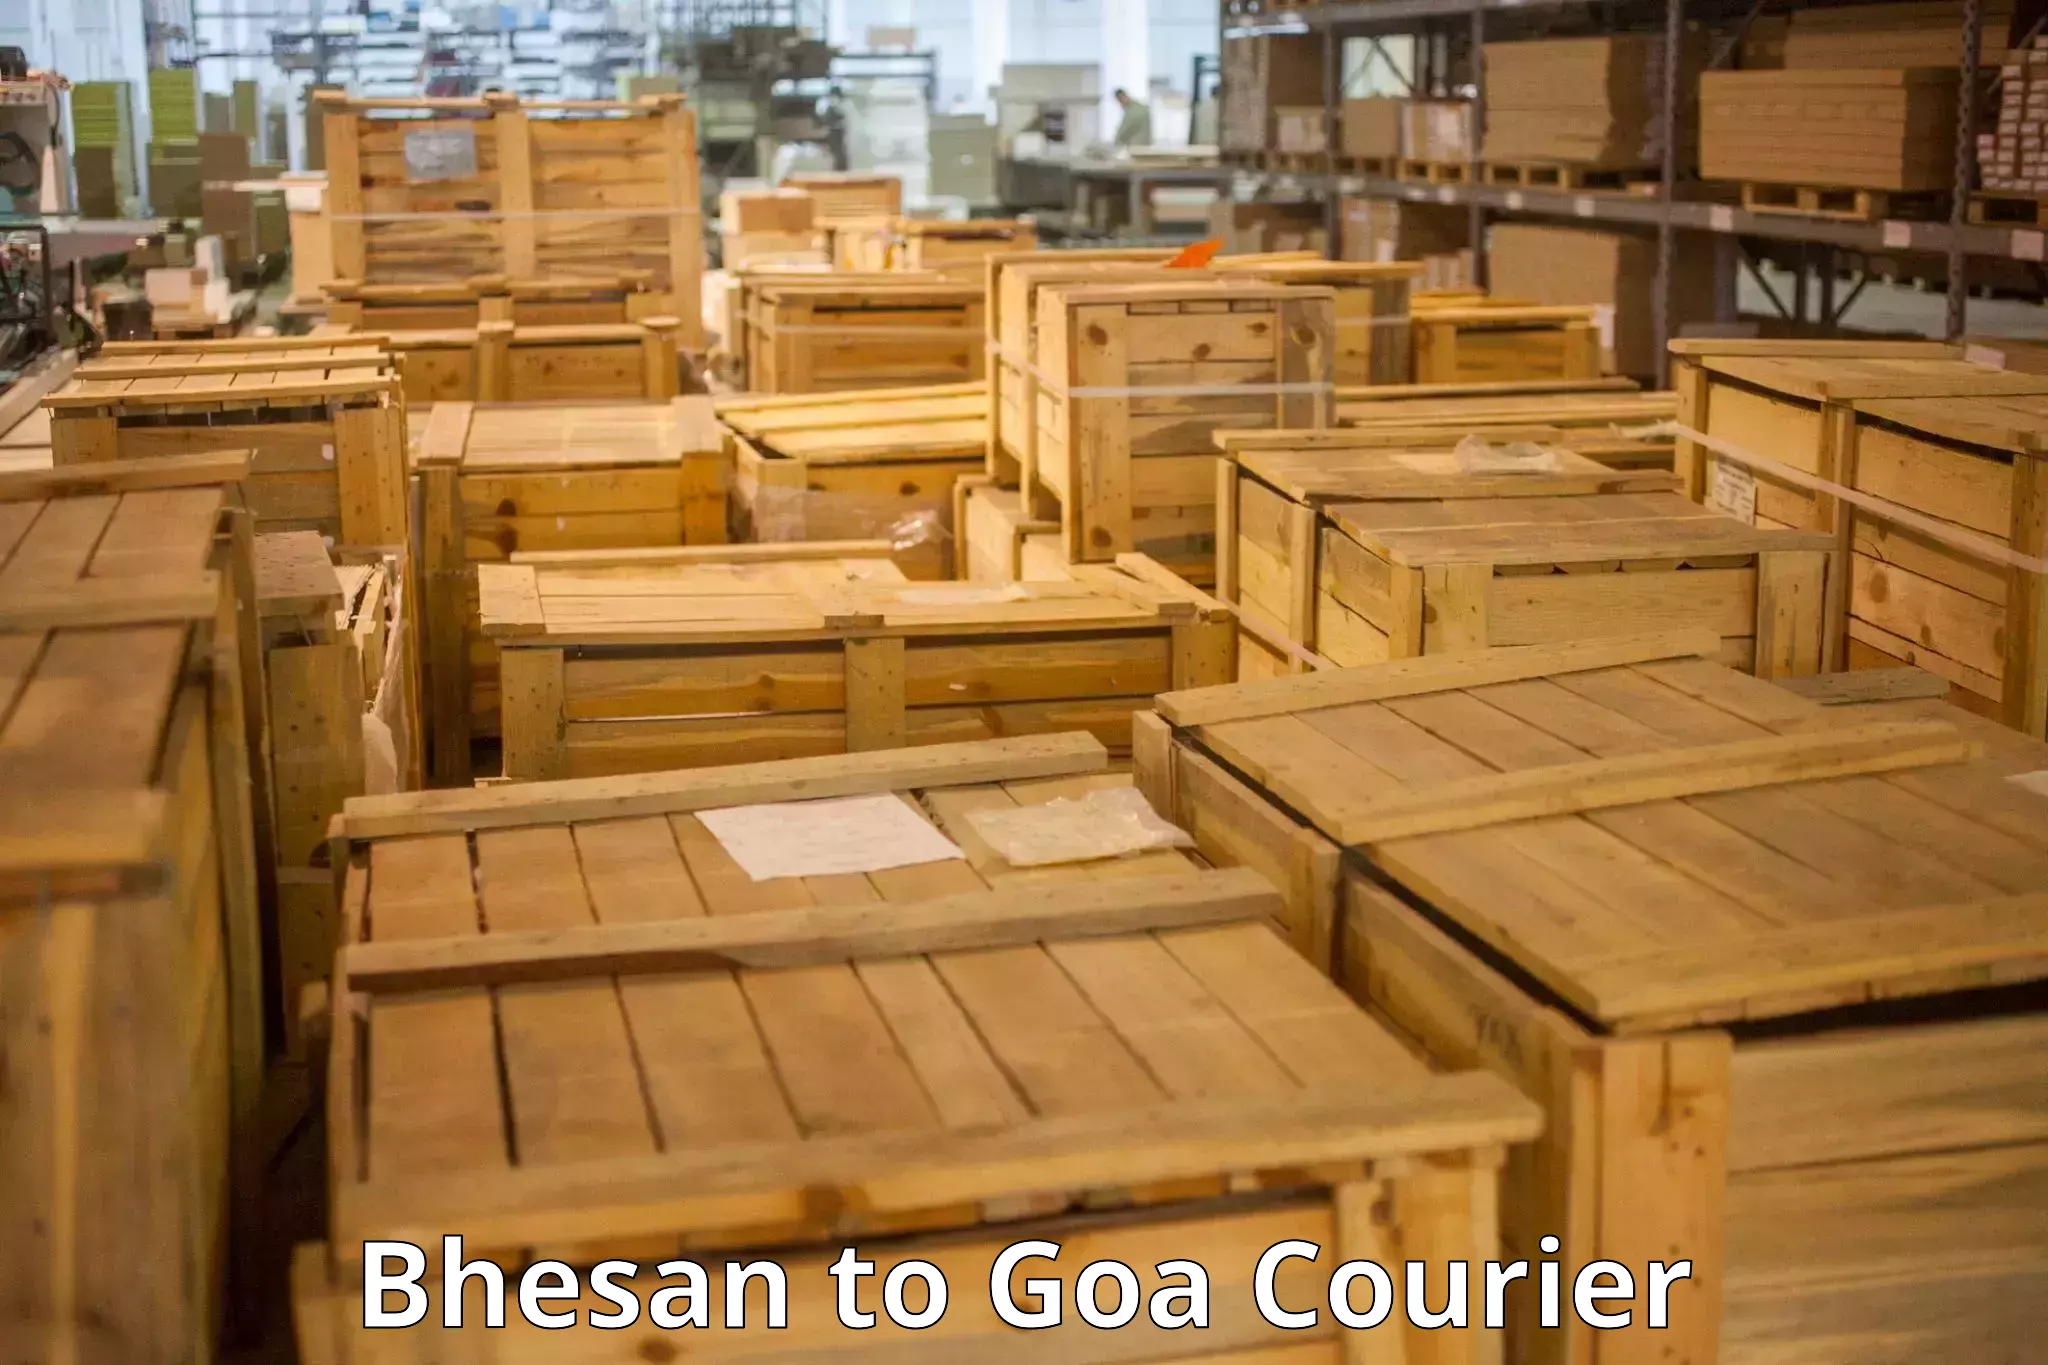 Doorstep luggage collection in Bhesan to Goa